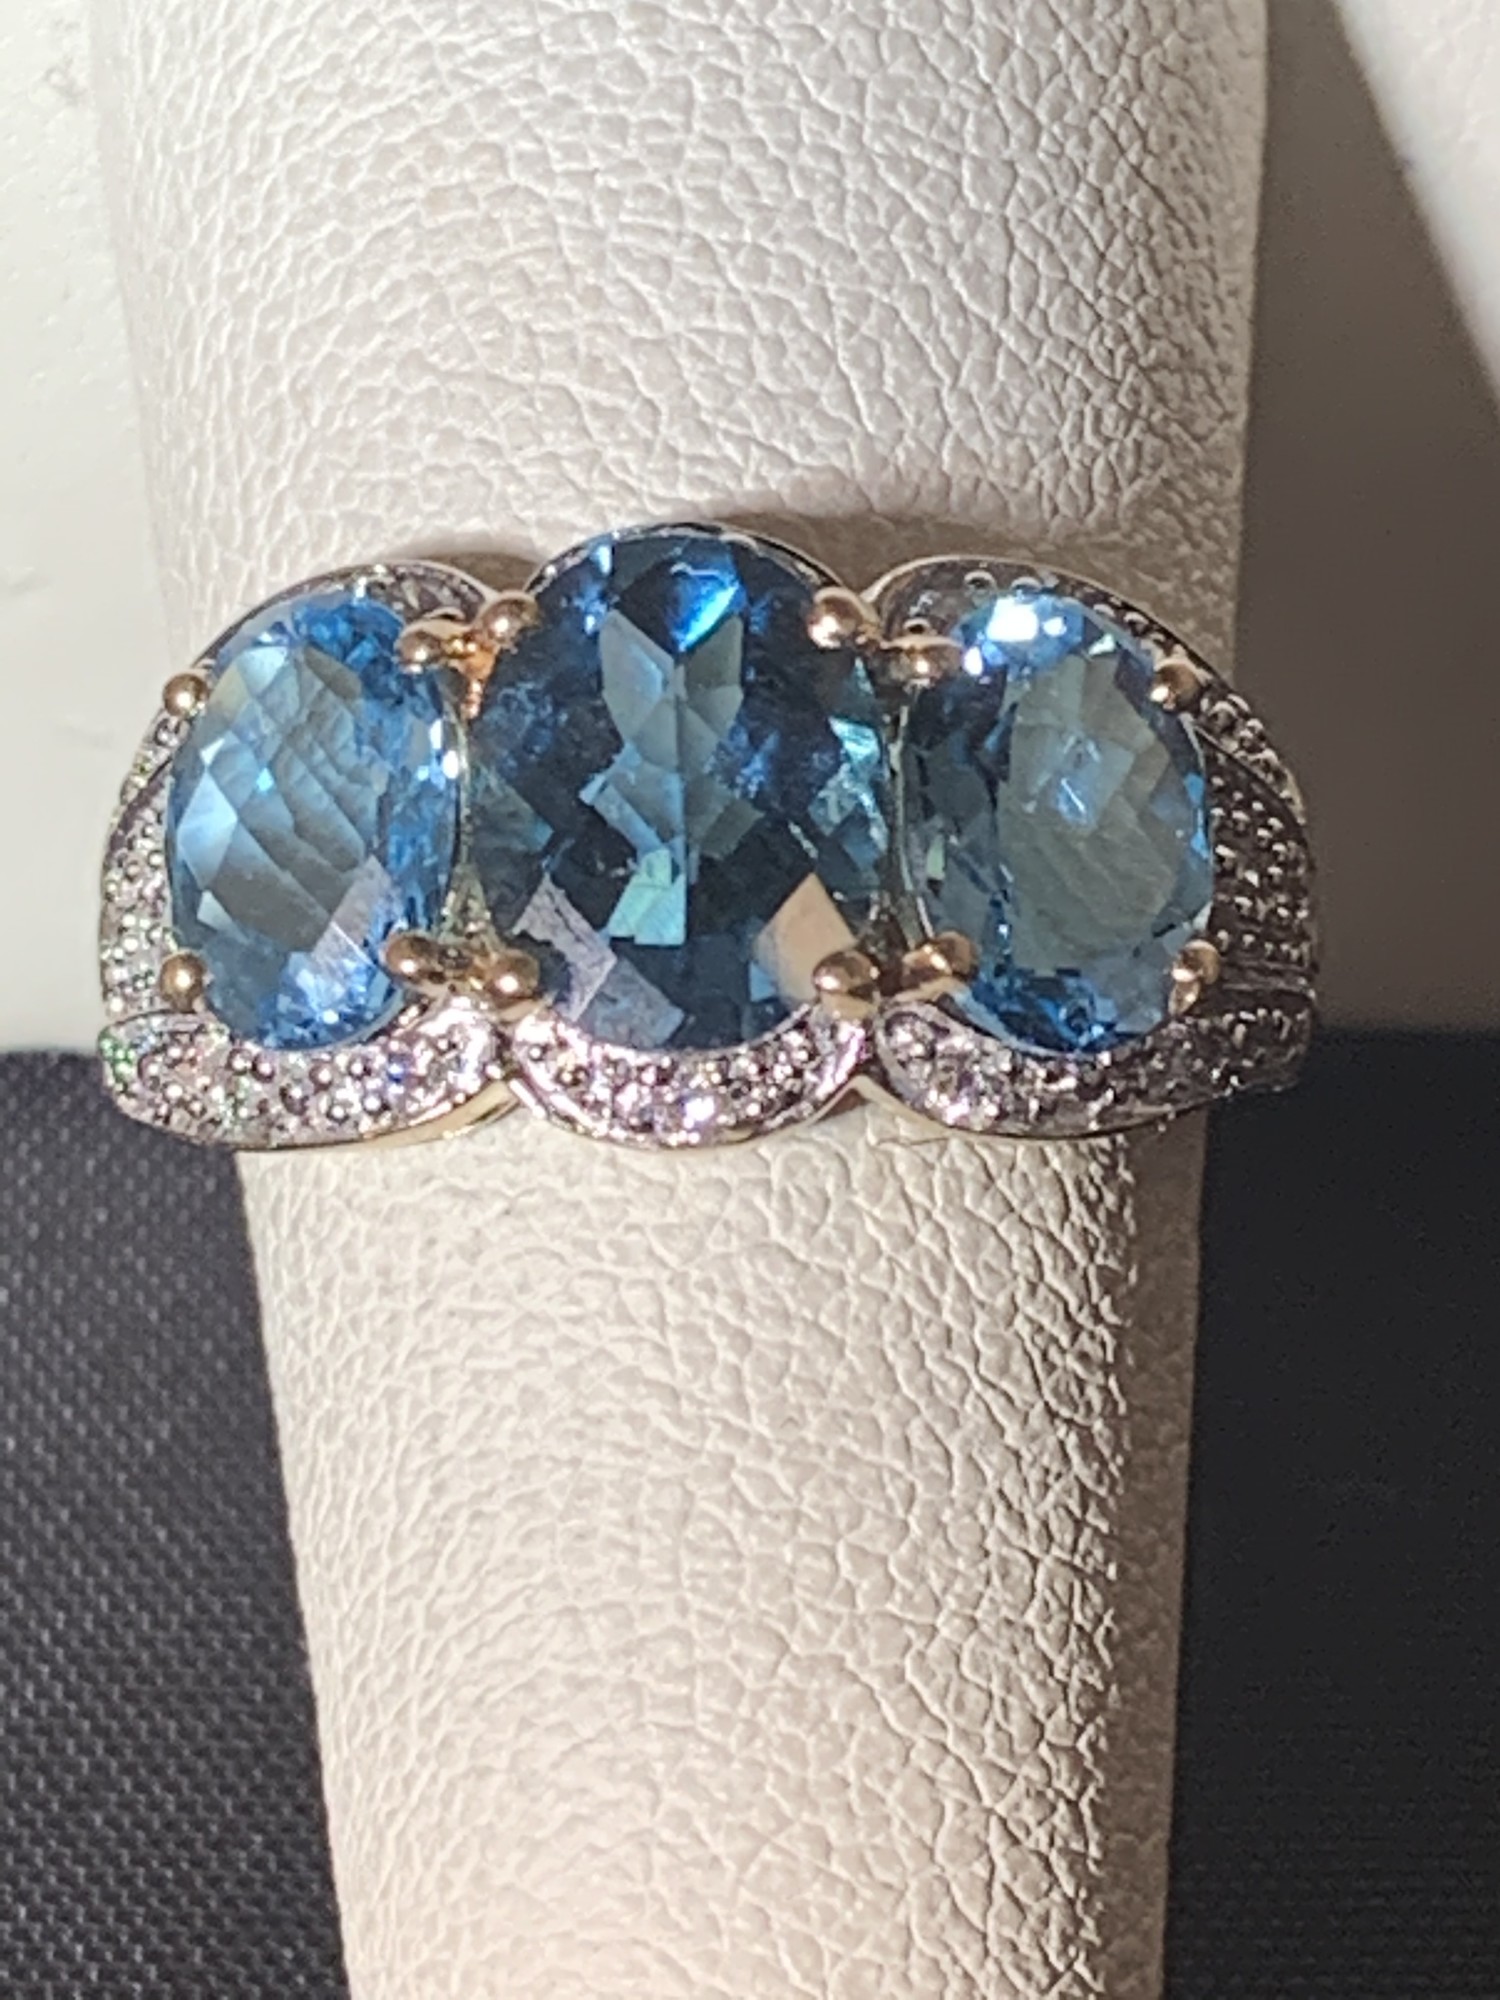 3 Oval Blue Topaz Ring with Diamond Halo Accent
Center Stone is London Blue Topaz and darker  than sides stones. There are 14 small Diamonds that create the illusion of  a Diamond Halo. Diamonds total approximately .10 carats.
14 karat Yellow Gold.
$590

Size 8   Can be sized up one size or down 2.